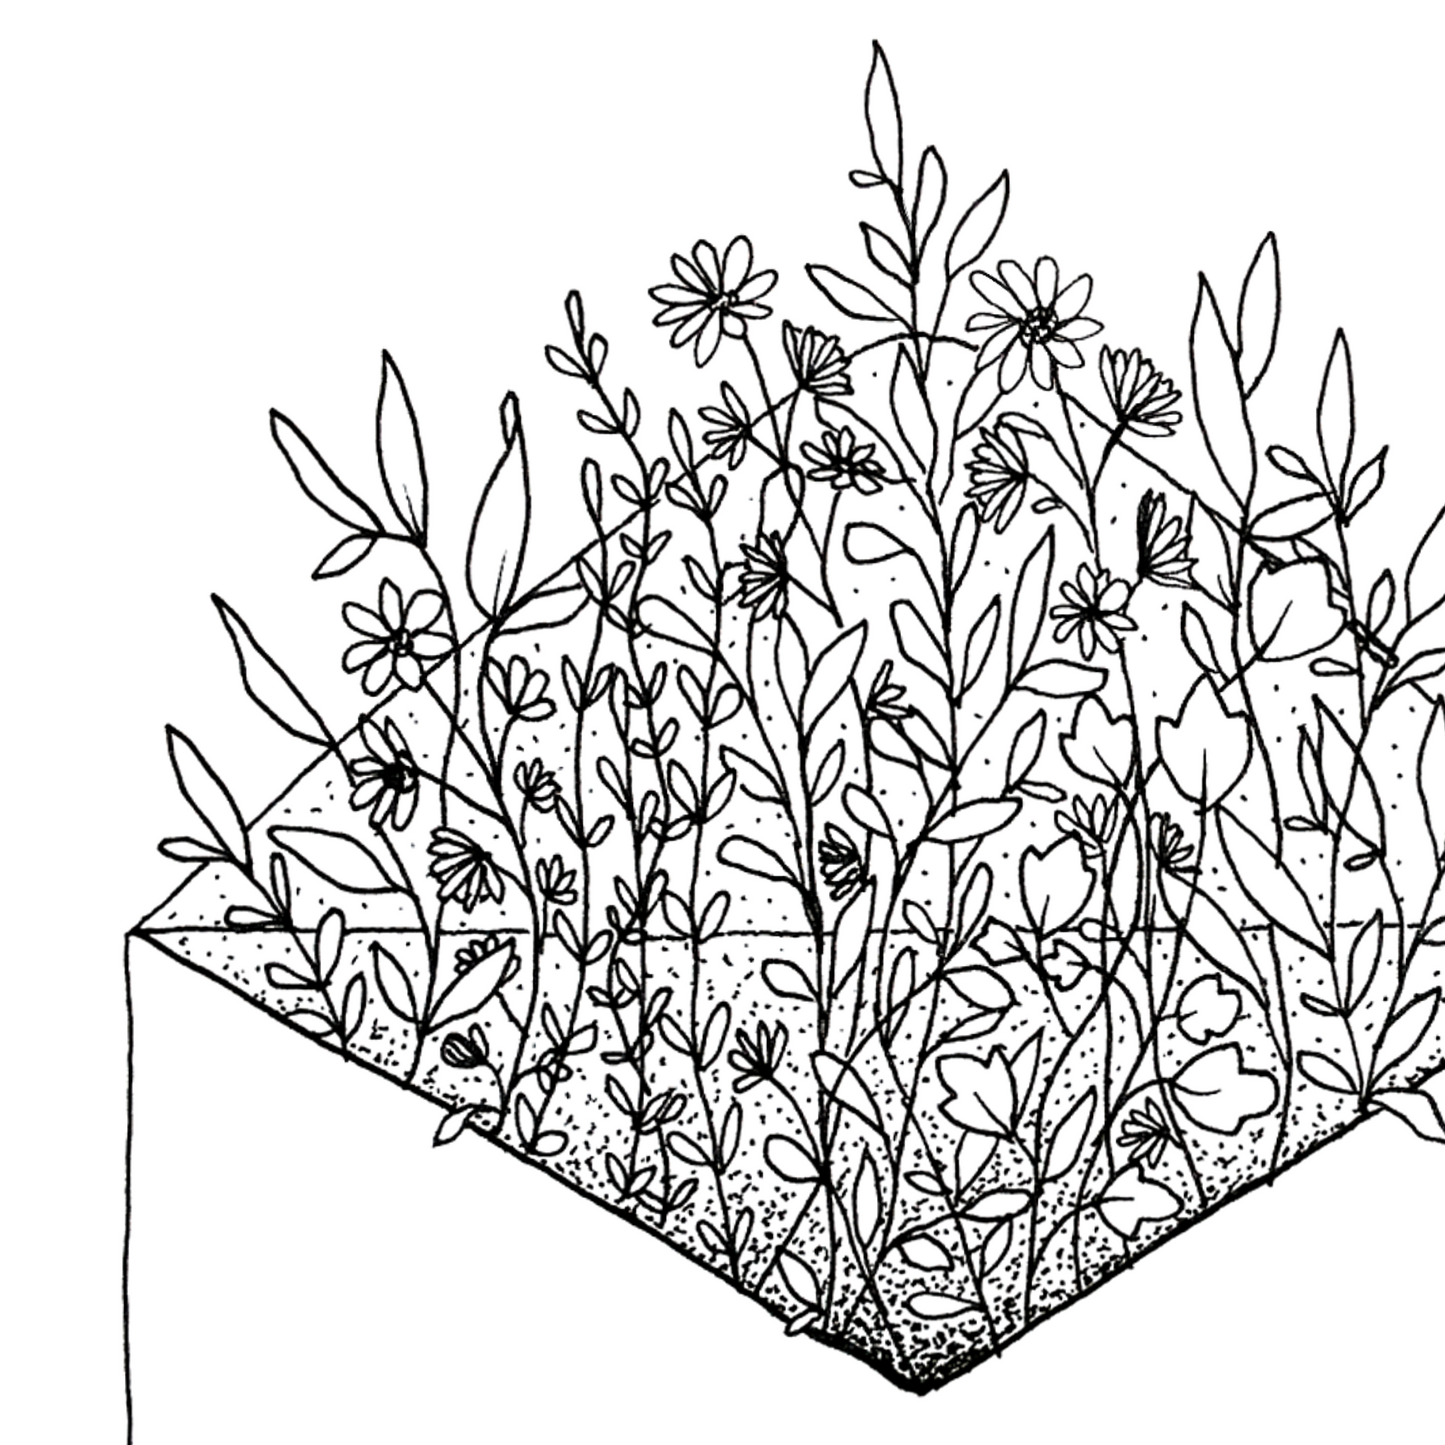 Image shows open envelop with floral arrangement coming out of it. Image is entirely black and white and shows great detail in the variety of flowers and dots drawn. 